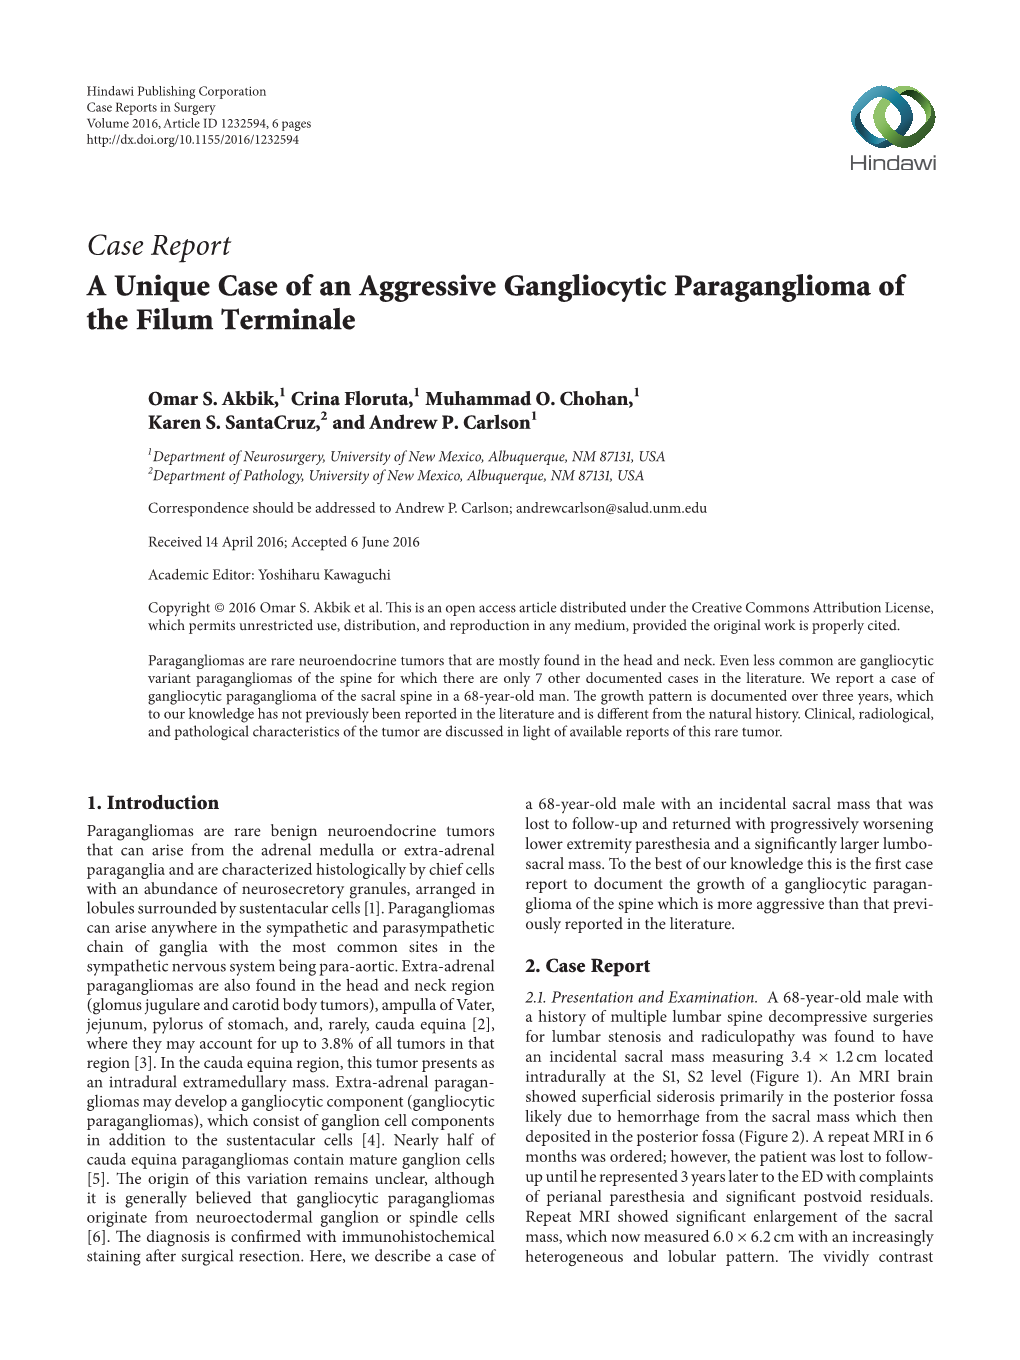 A Unique Case of an Aggressive Gangliocytic Paraganglioma of the Filum Terminale